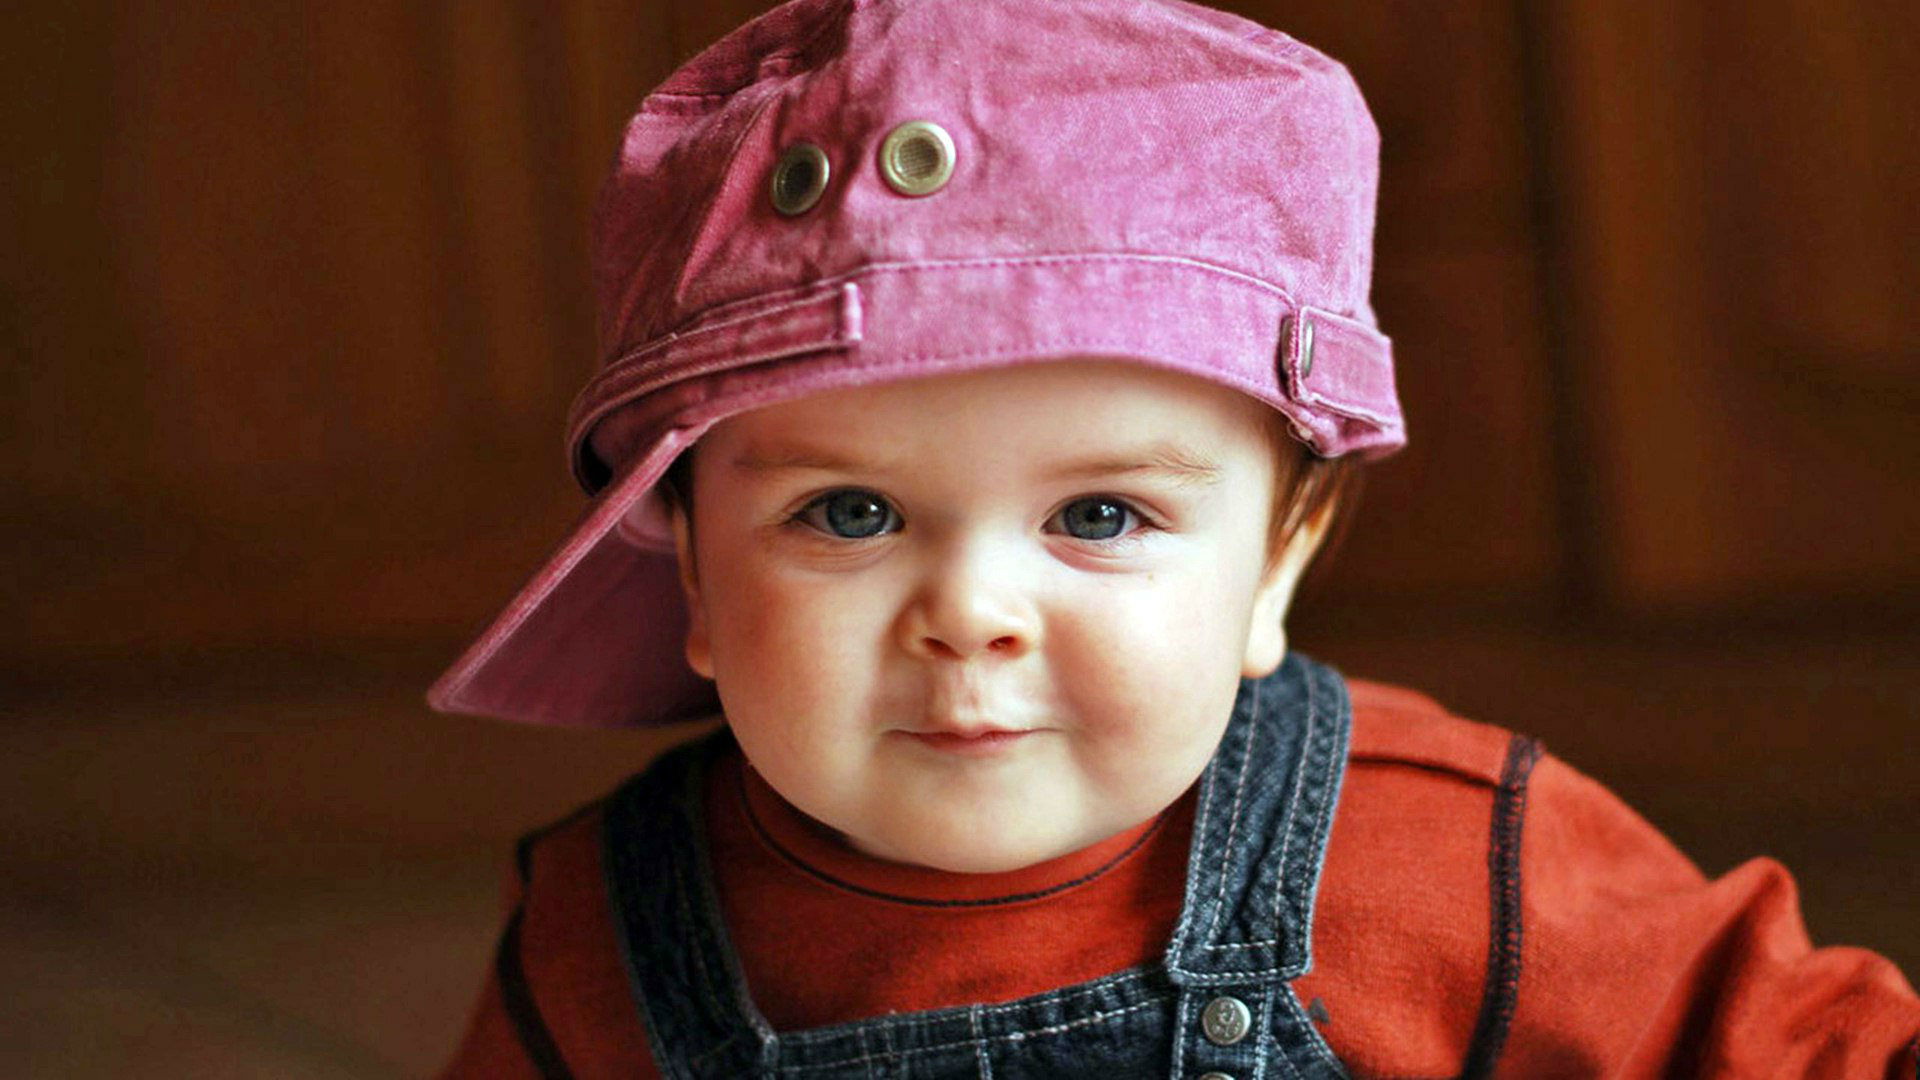 Cute Baby Boys HD Wallpaper Pictures